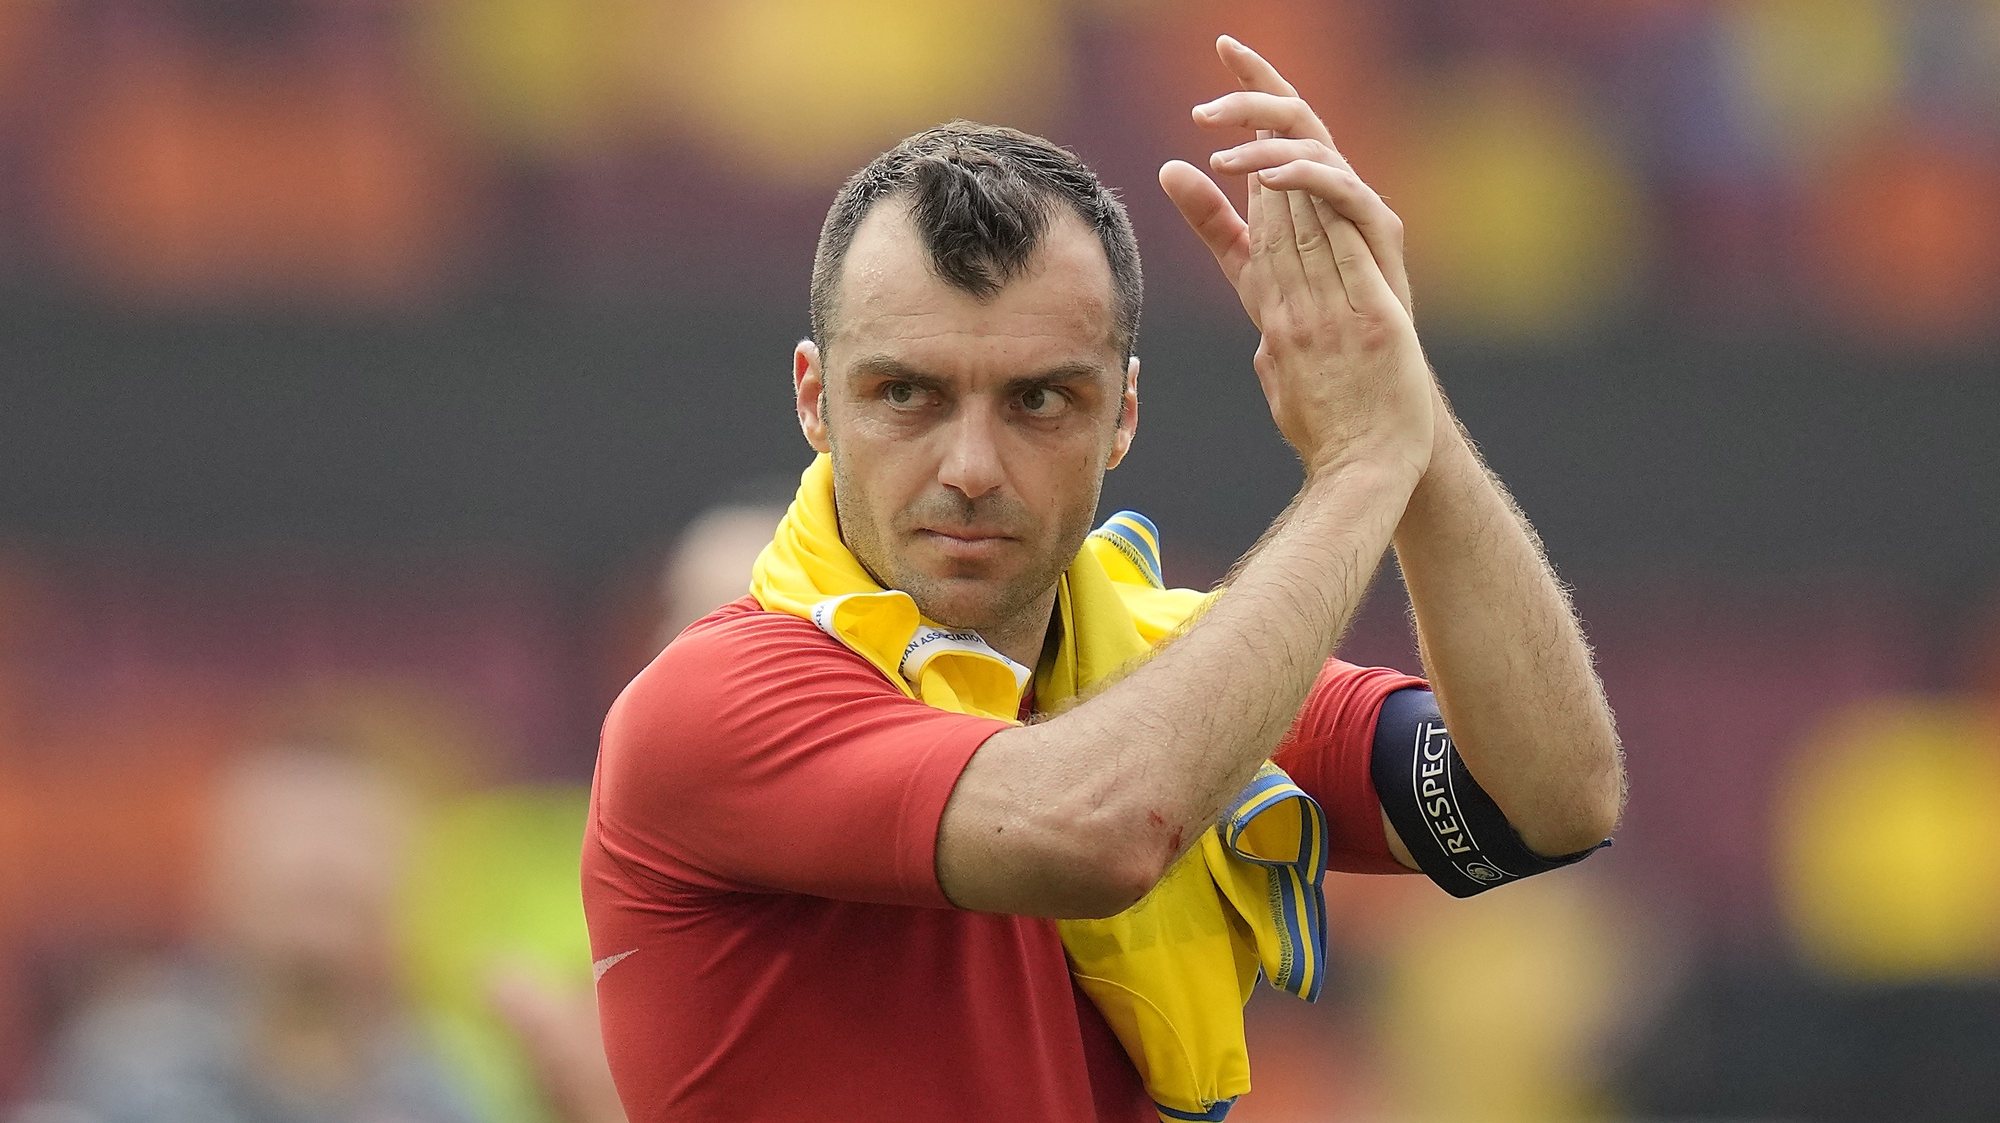 epa09279833 Goran Pandev of North Macedonia reacts after the UEFA EURO 2020 group C preliminary round soccer match between Ukraine and North Macedonia in Bucharest, Romania, 17 June 2021.  EPA/Vadim Ghirda / POOL (RESTRICTIONS: For editorial news reporting purposes only. Images must appear as still images and must not emulate match action video footage. Photographs published in online publications shall have an interval of at least 20 seconds between the posting.)